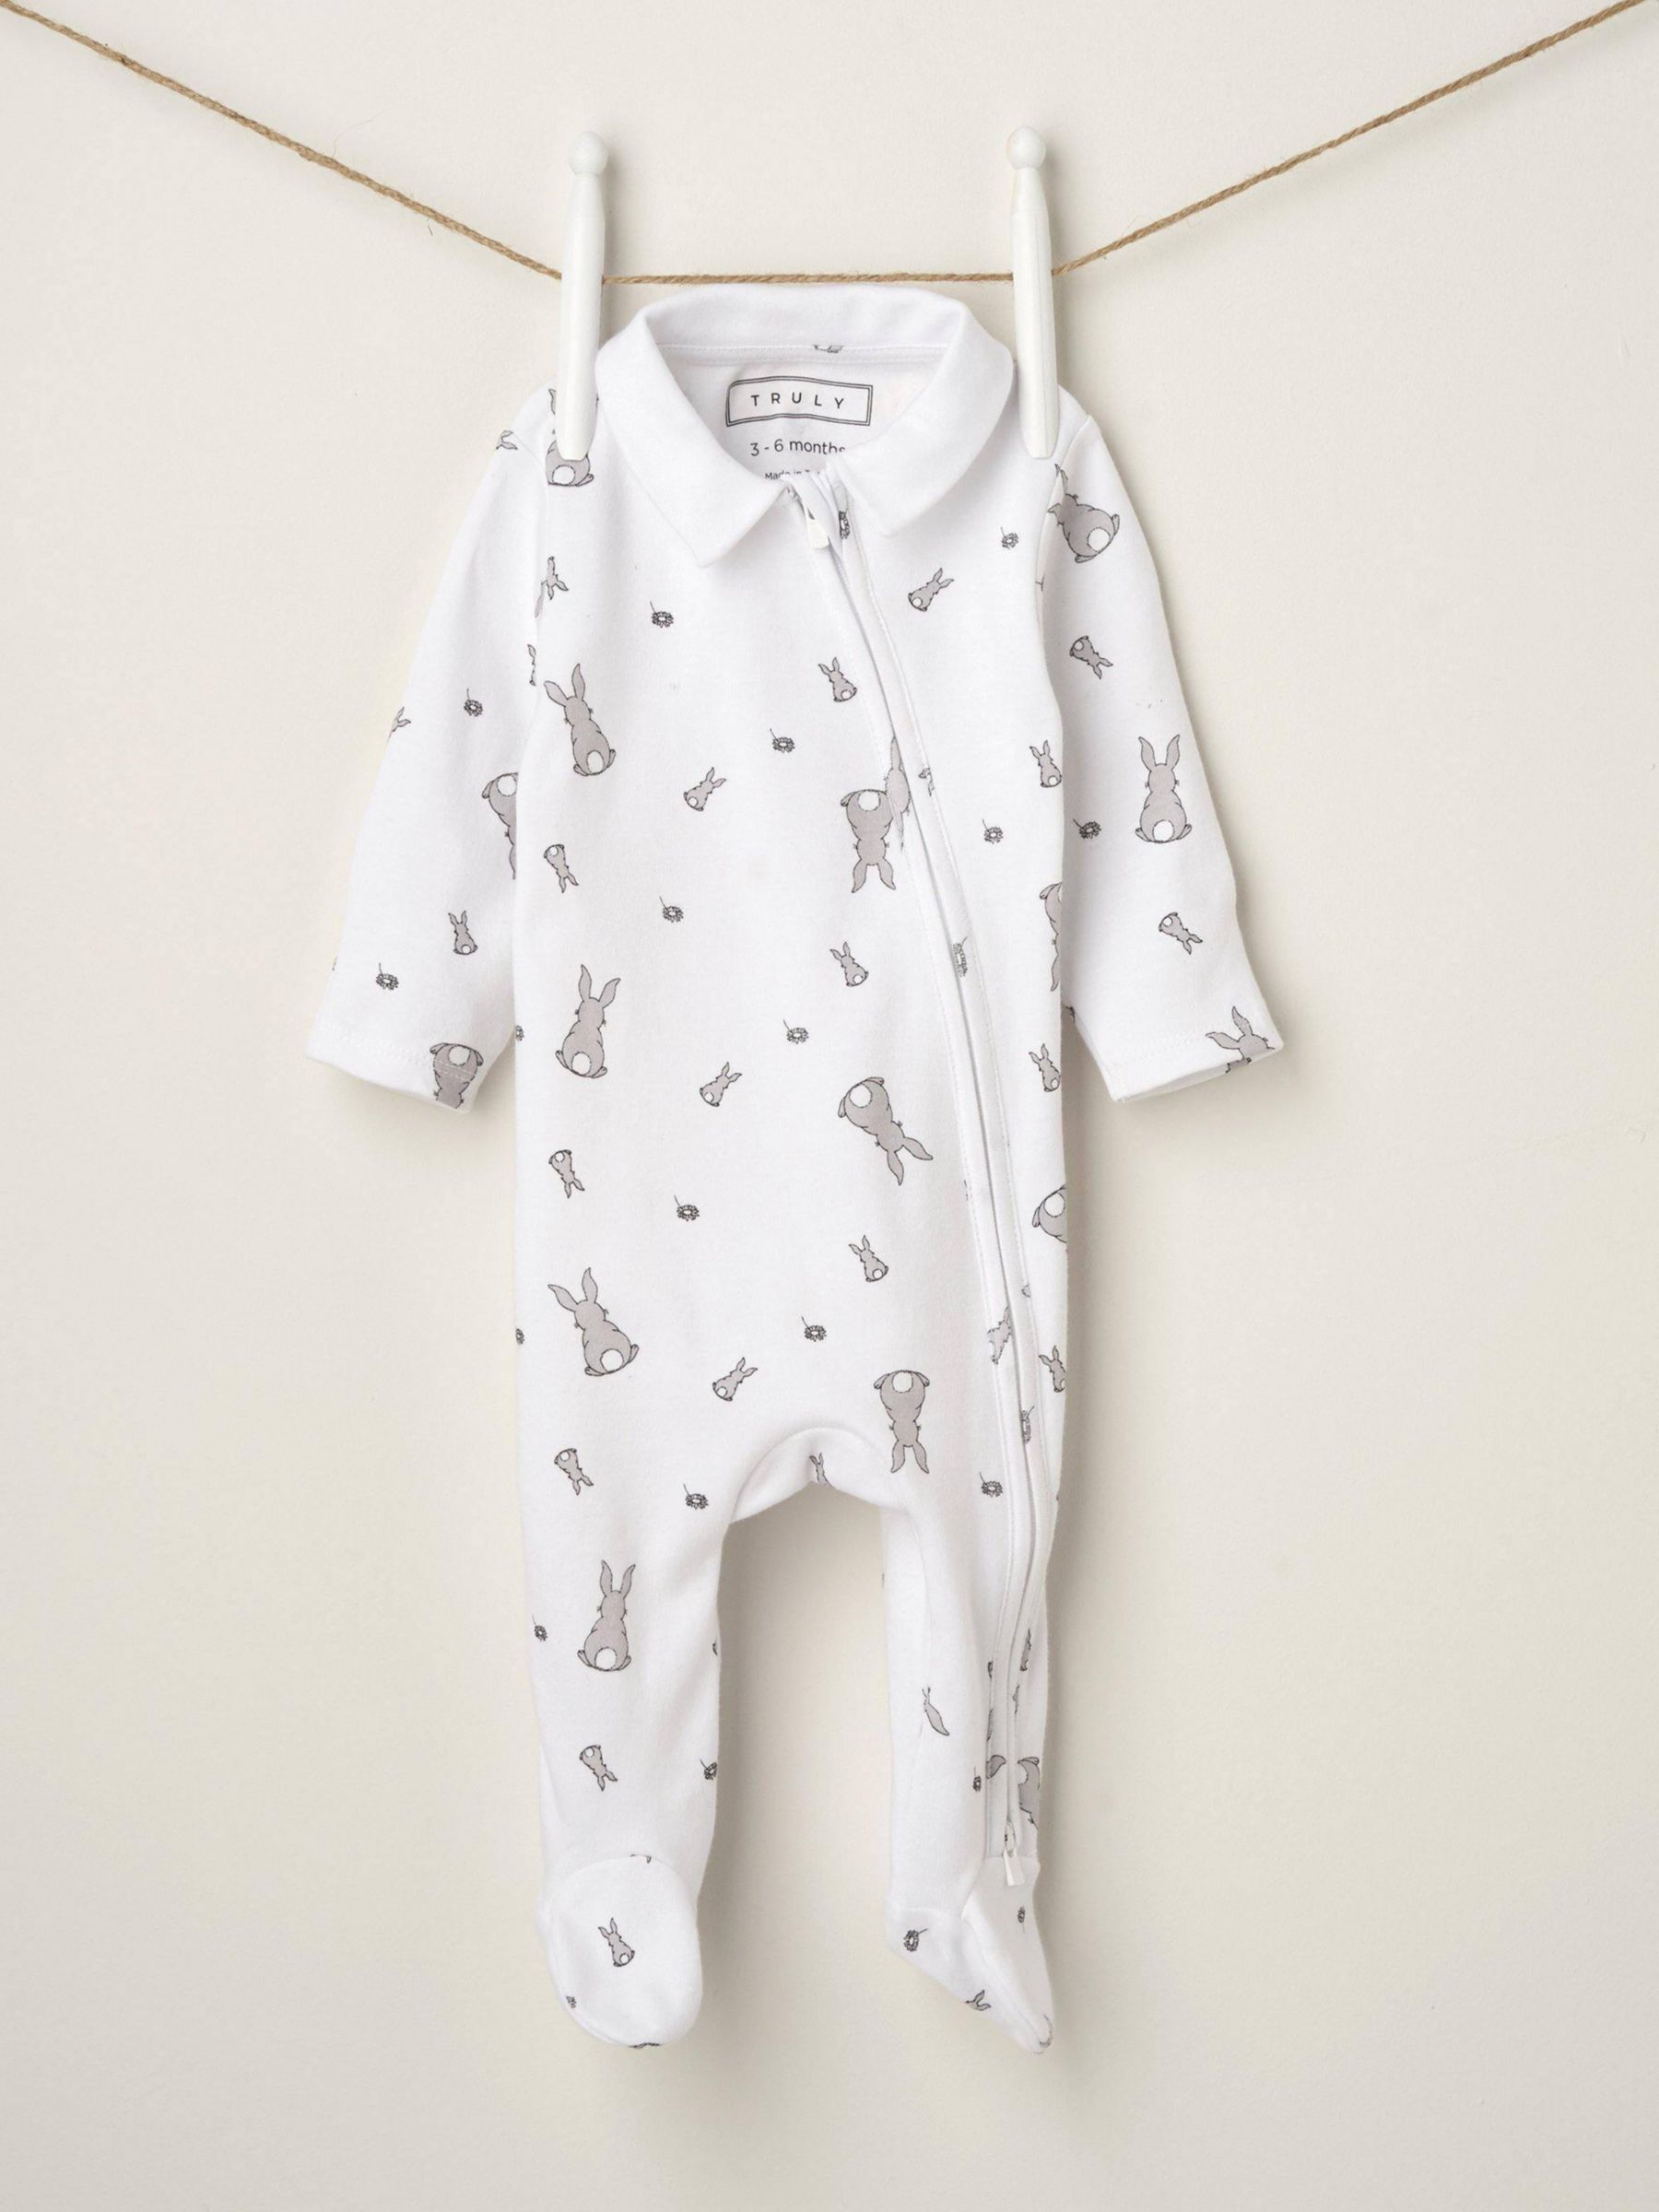 Buy Truly Baby Bunny Print Collared Babygrow, White Online at johnlewis.com